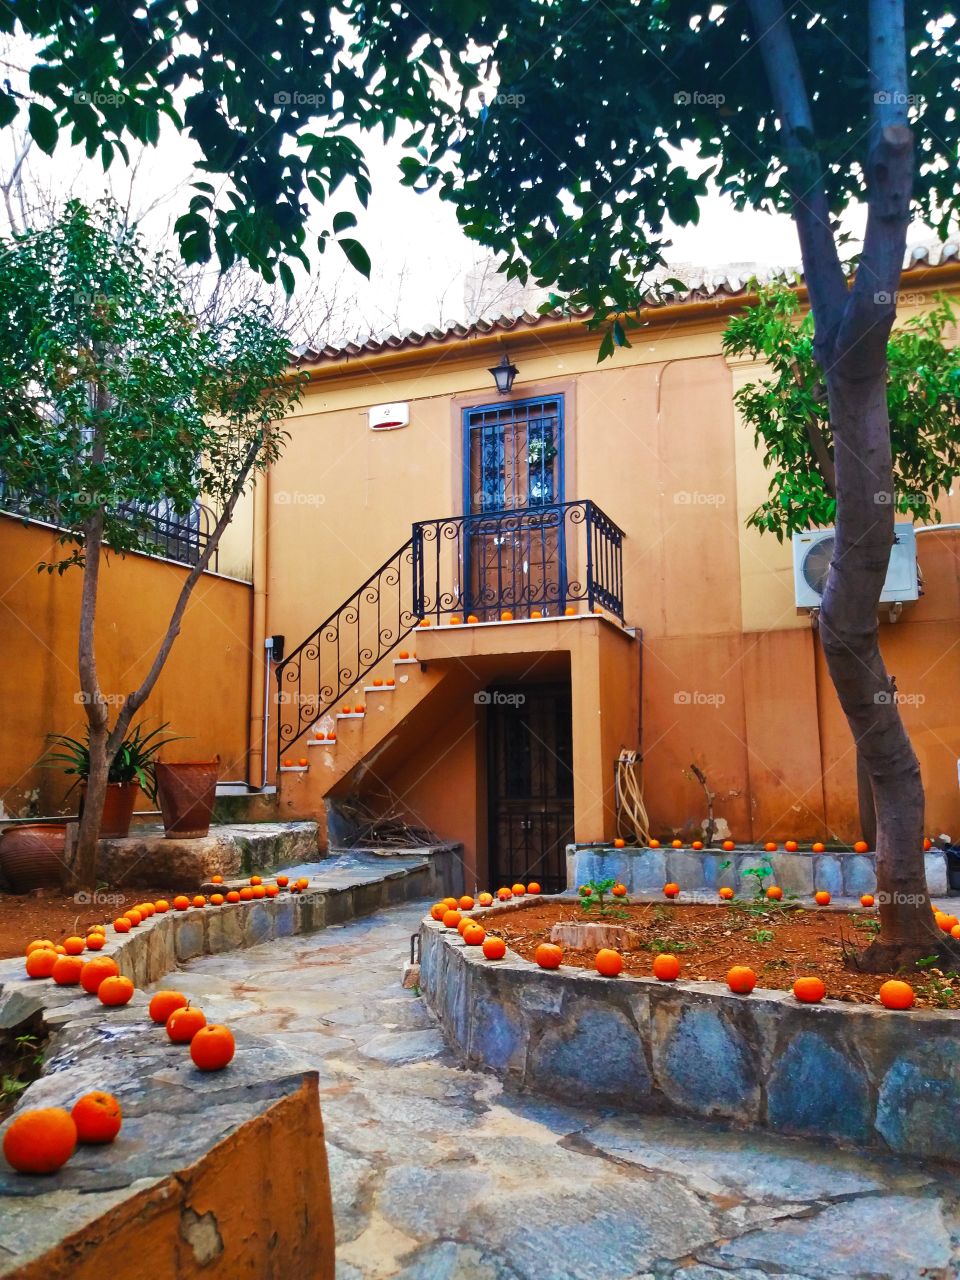 House full of oranges, Athens, Greece